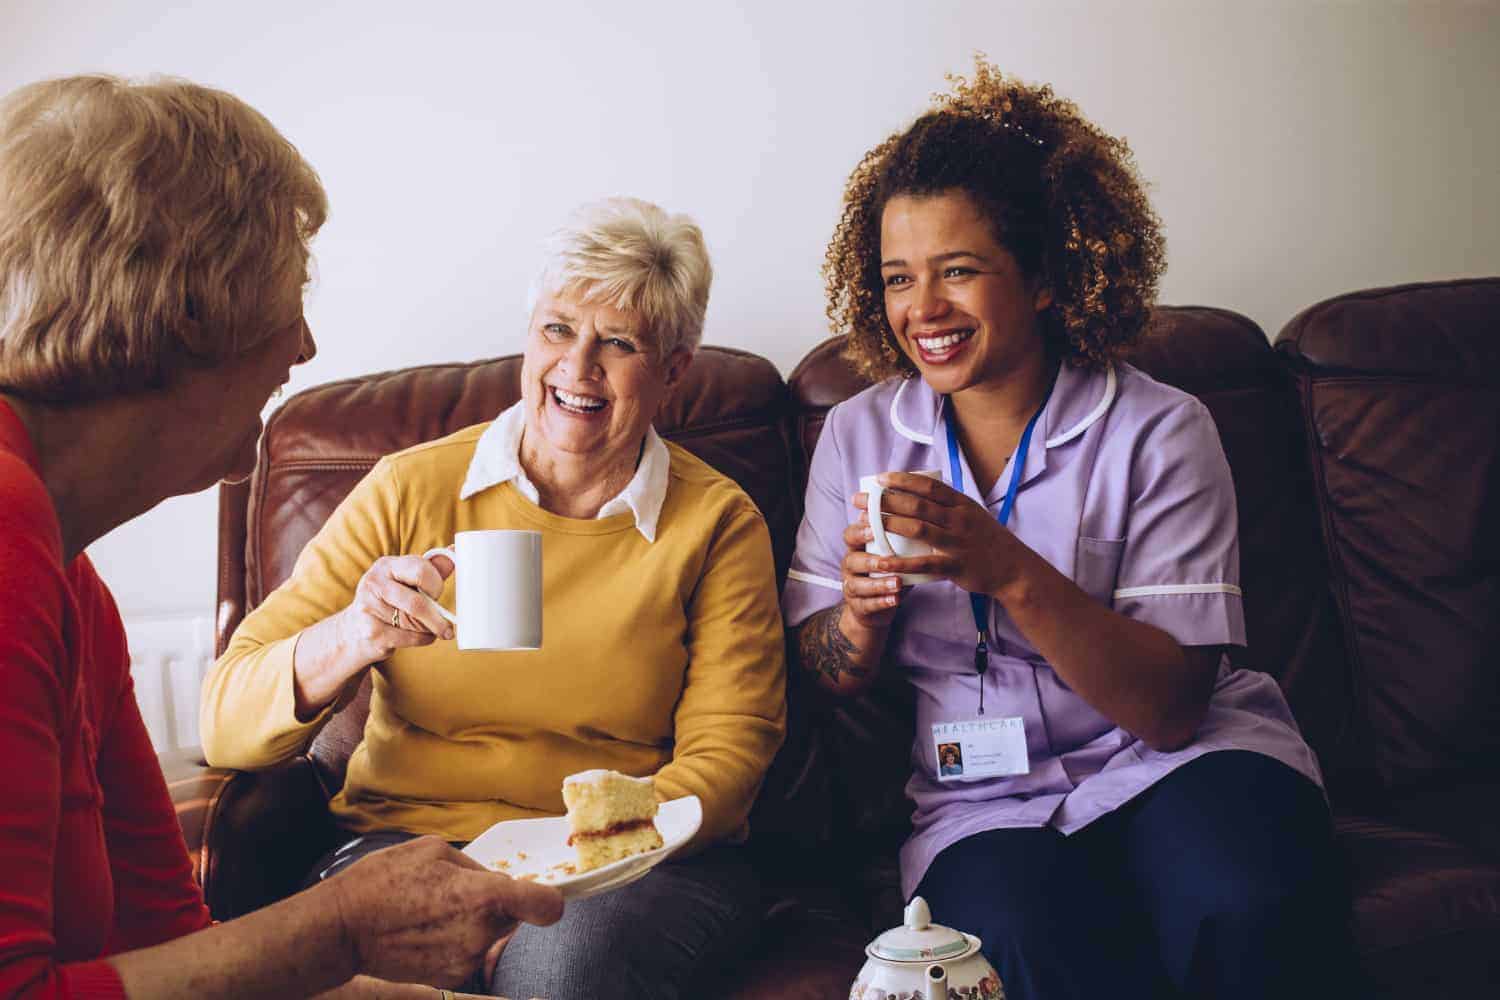 Three women sharing a joyful moment over tea and snacks, with the youngest wearing a nurse's uniform, suggesting a warm home care provider-patient relationship.